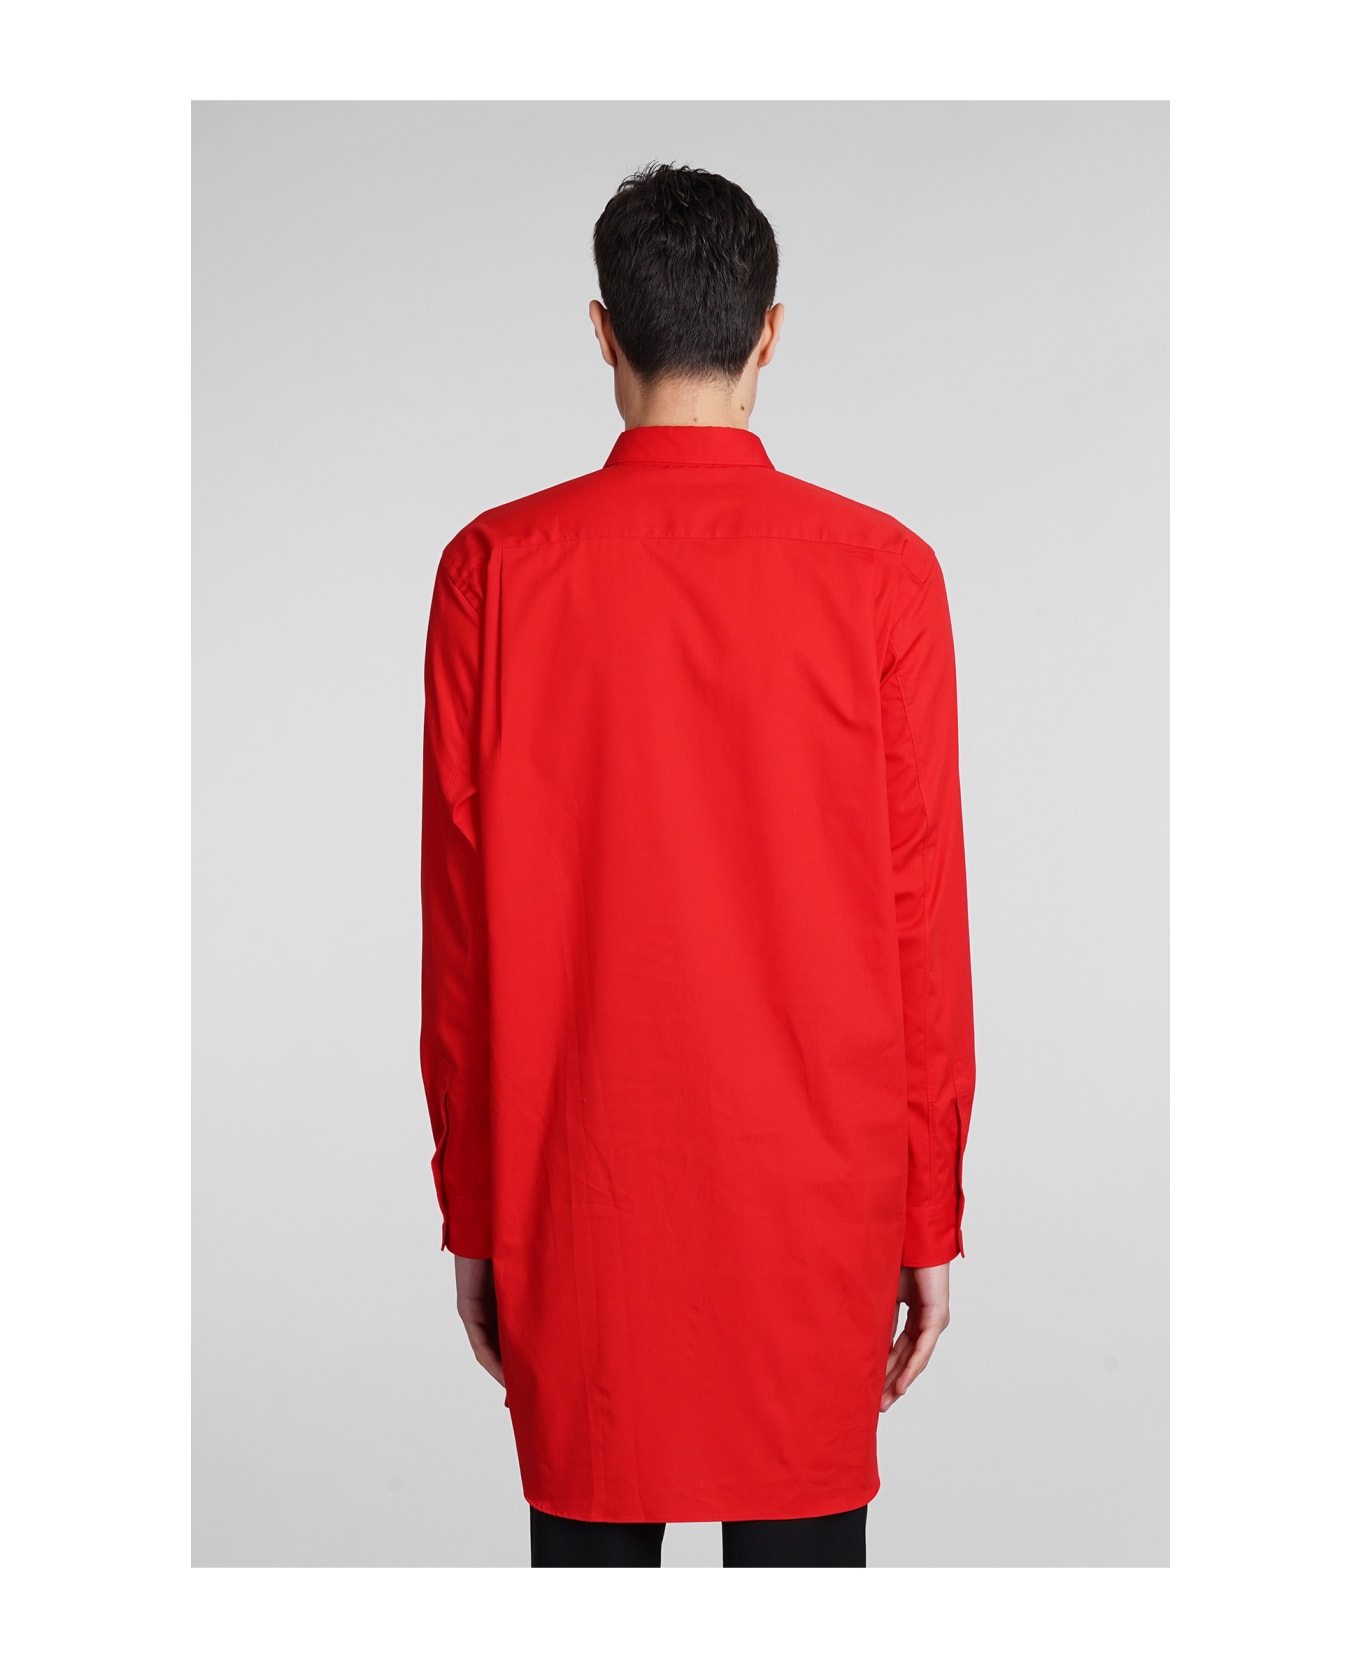 Comme Des Garçons Homme Plus Shirt In Red Cotton - red シャツ